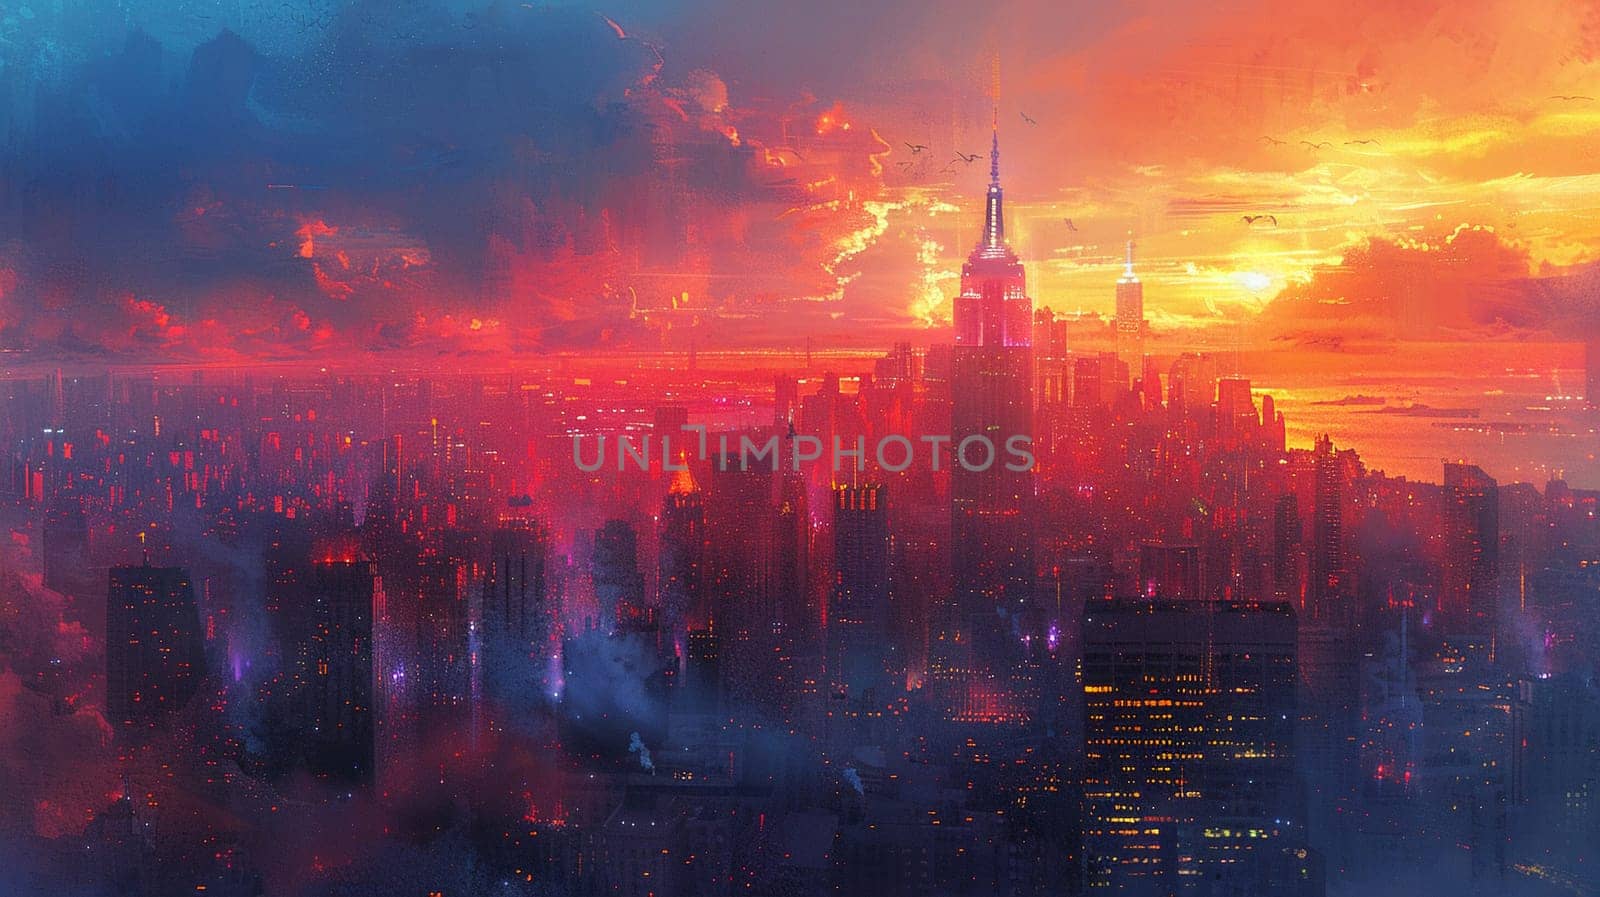 City overlook rendered in an expressive, painterly style, with loose brushwork and a vibrant palette.